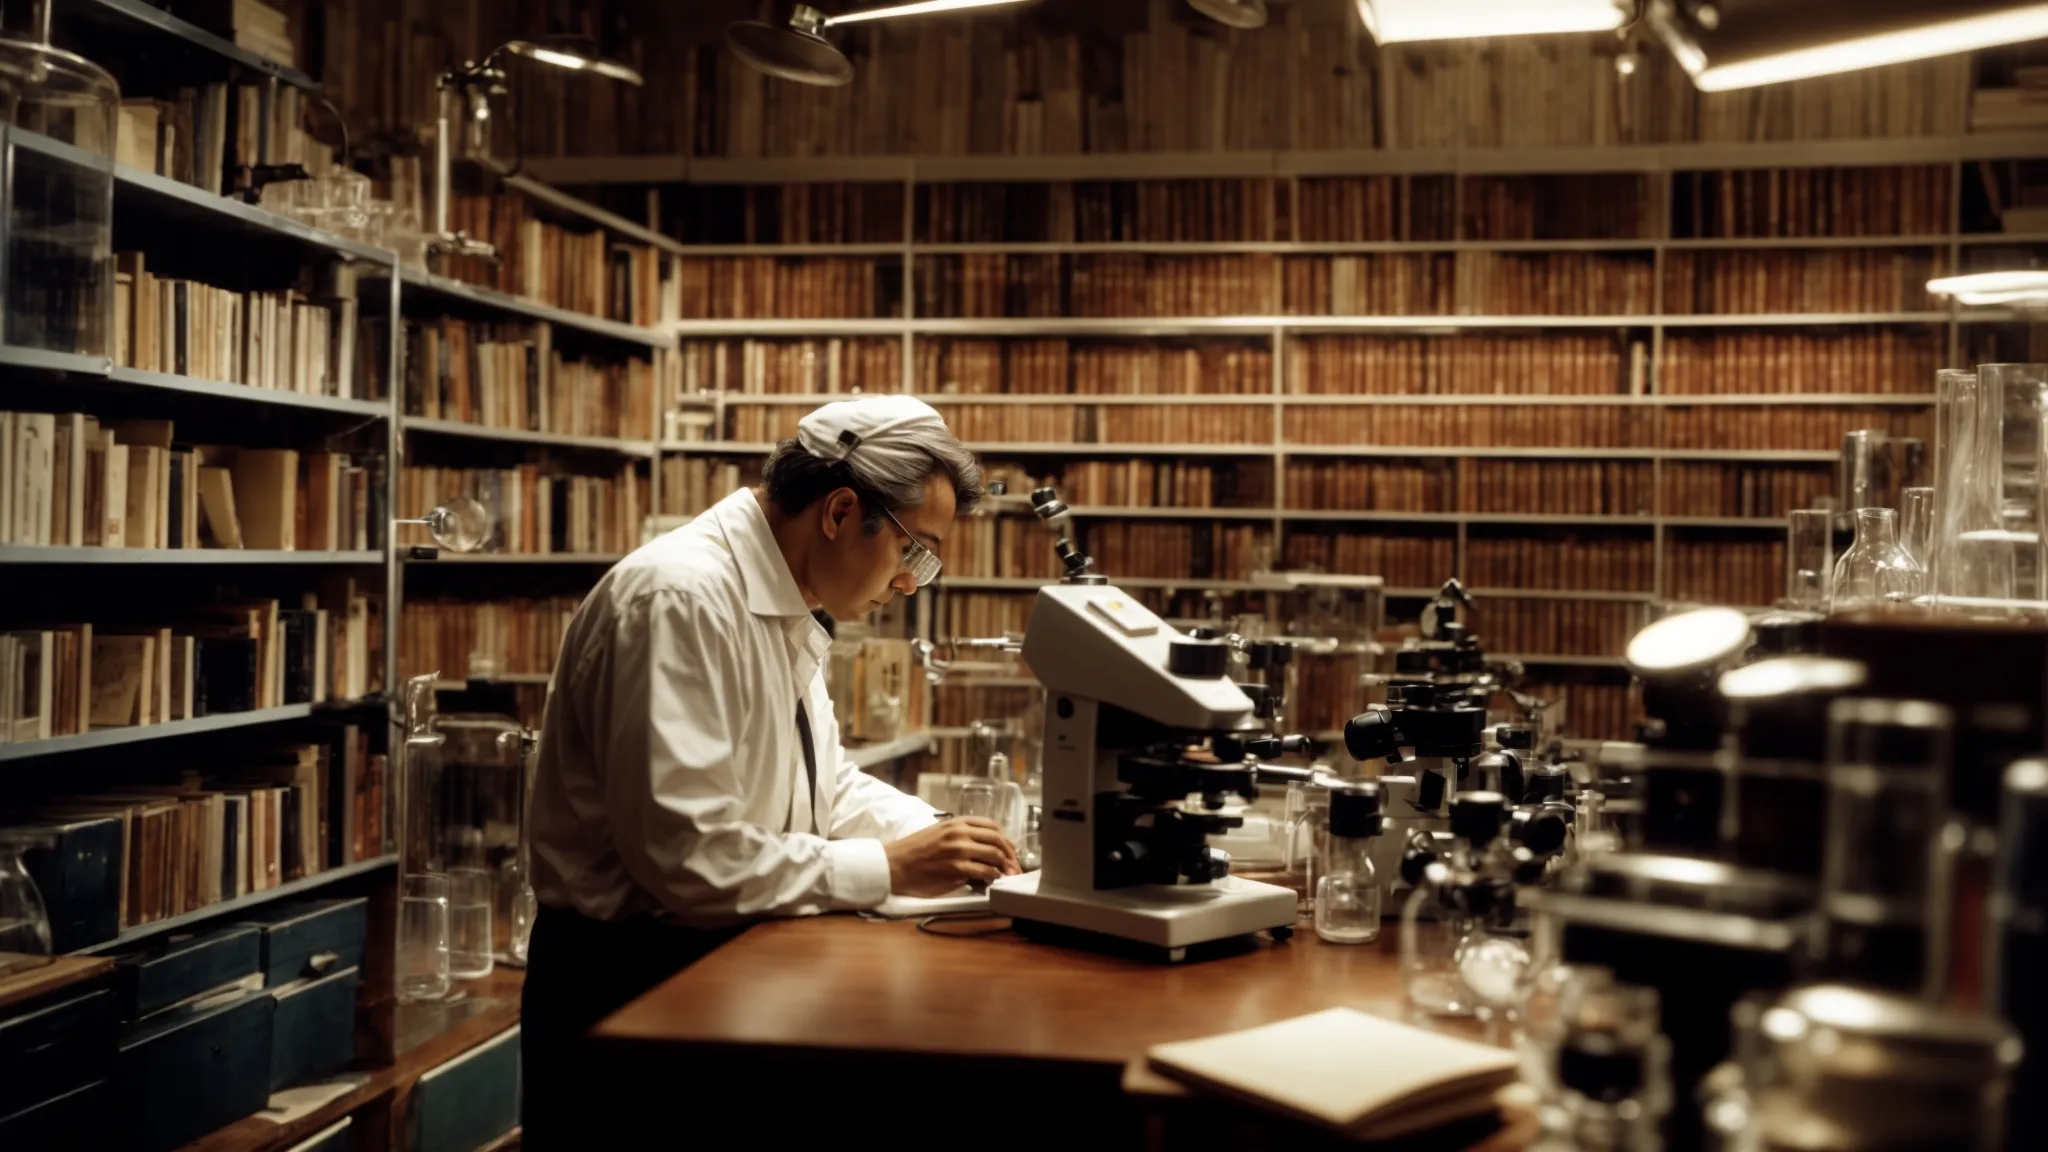 a pioneering scientist peers into a microscope in a sunlit laboratory, surrounded by shelves filled with books and glassware.